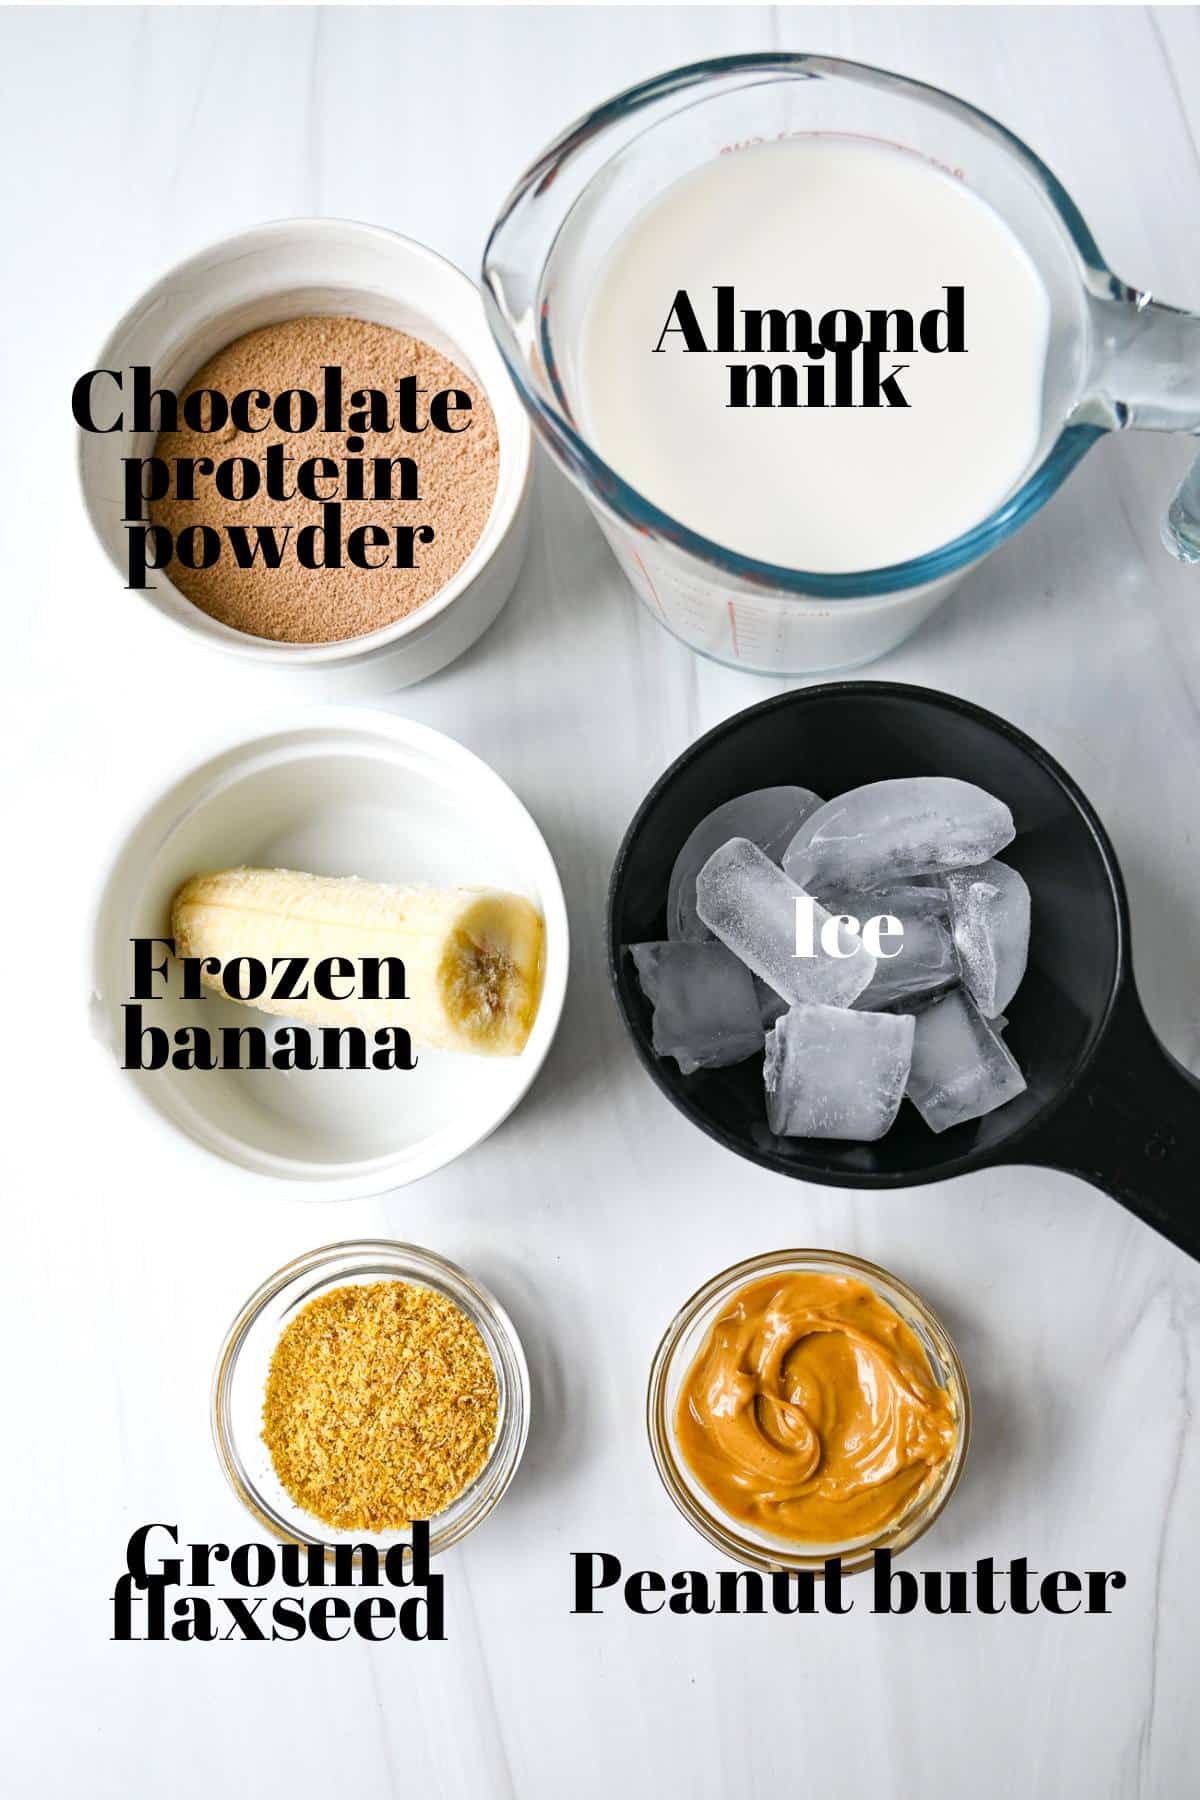 ingredients for making a protein shake with chocolate protein powder, frozen banana, and peanut butter measured out on a counter